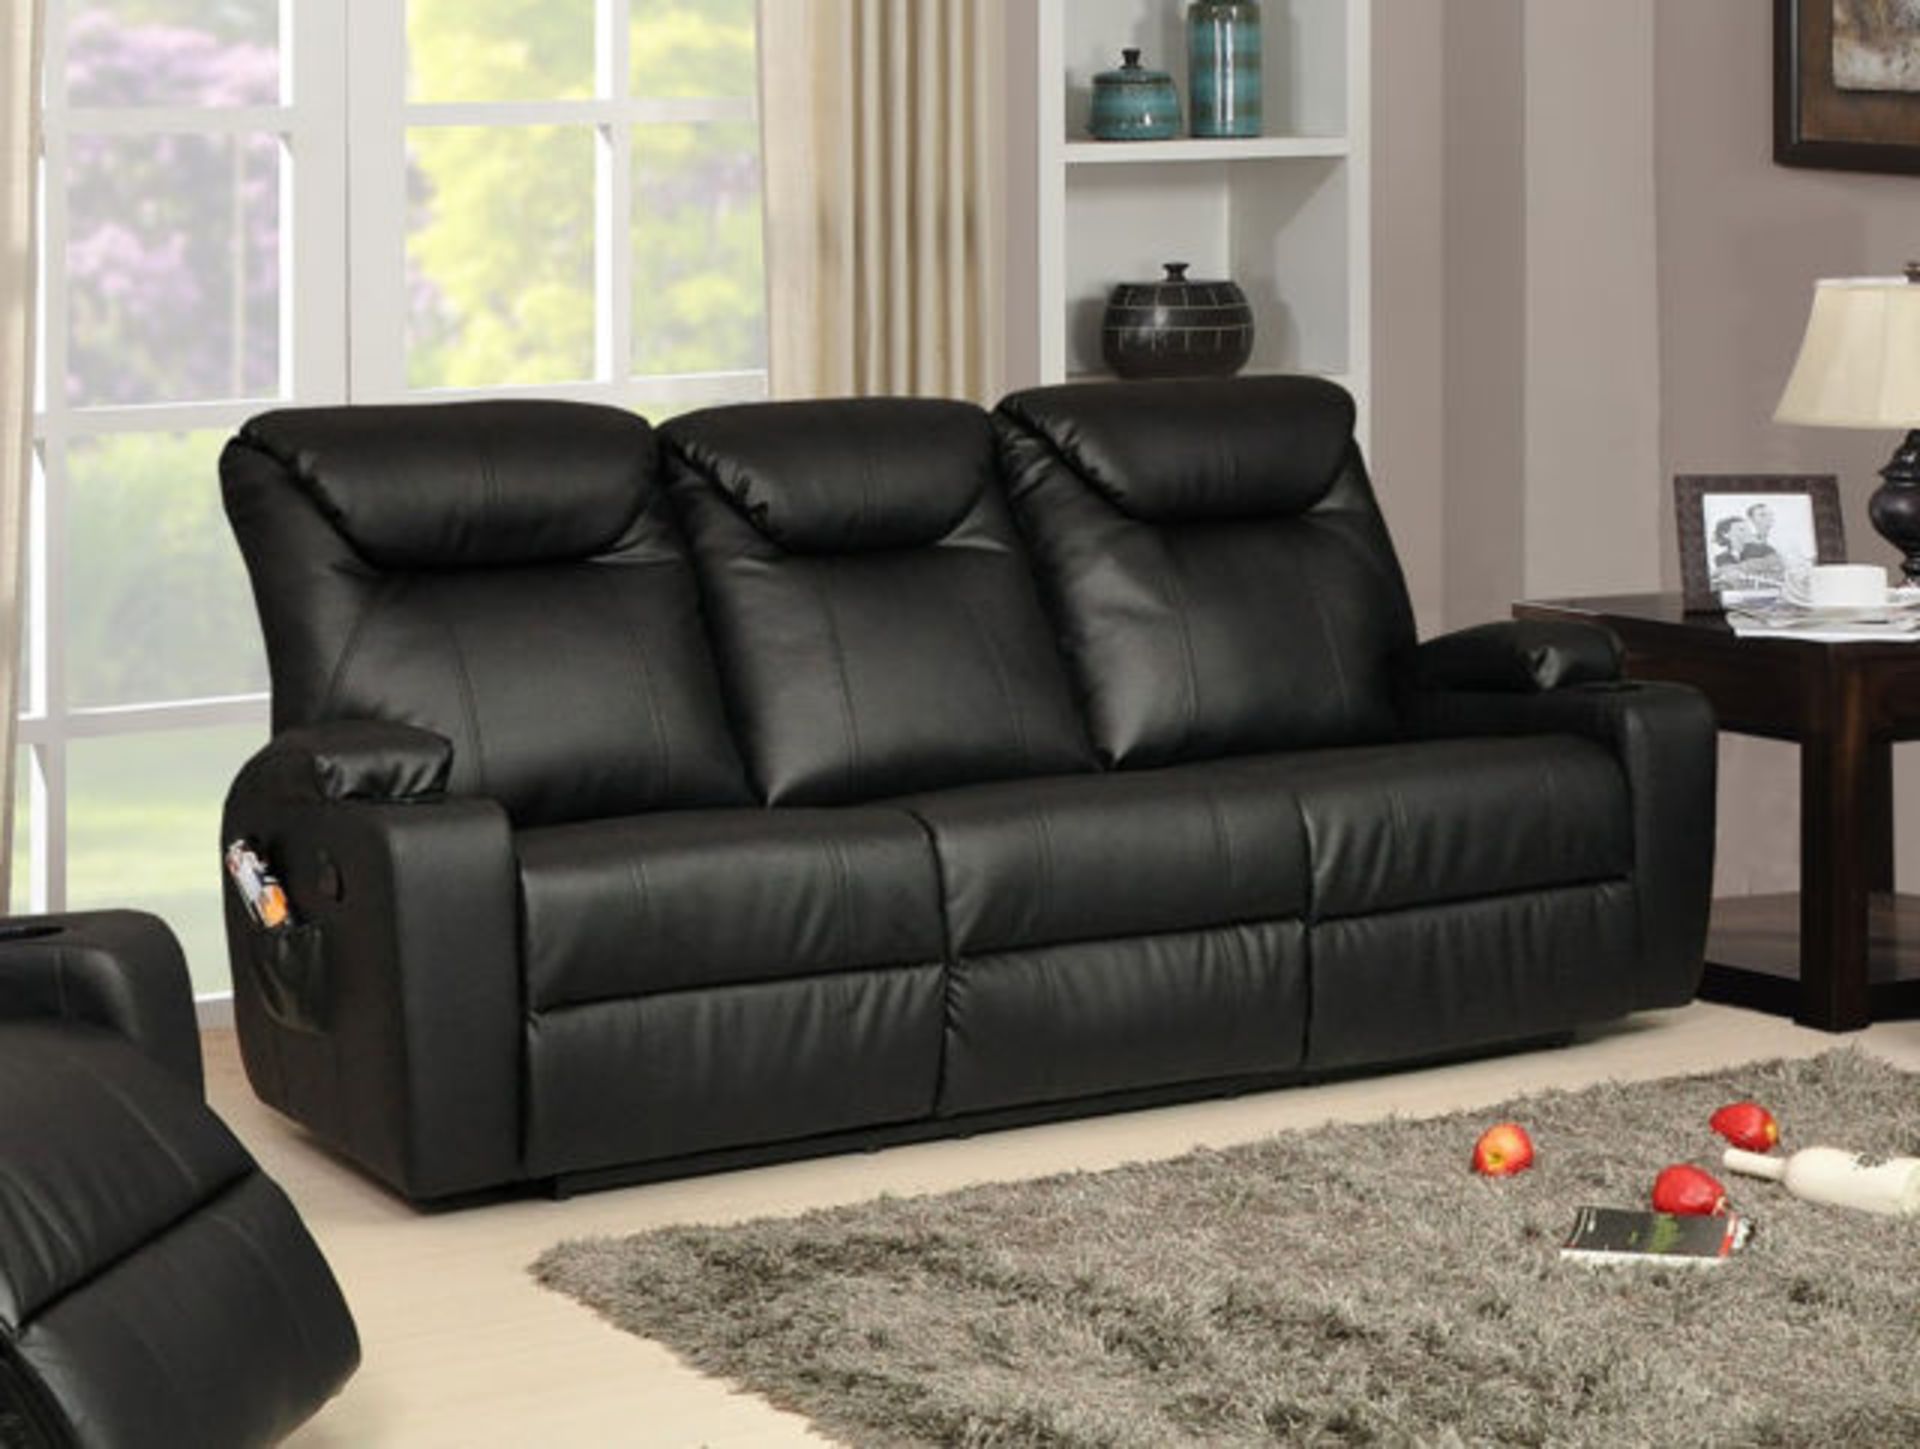 Brand New Boxed 3 Seater Plus 2 Seater Lazyboy Black Leather Manual Reclining Sofas - Image 2 of 3